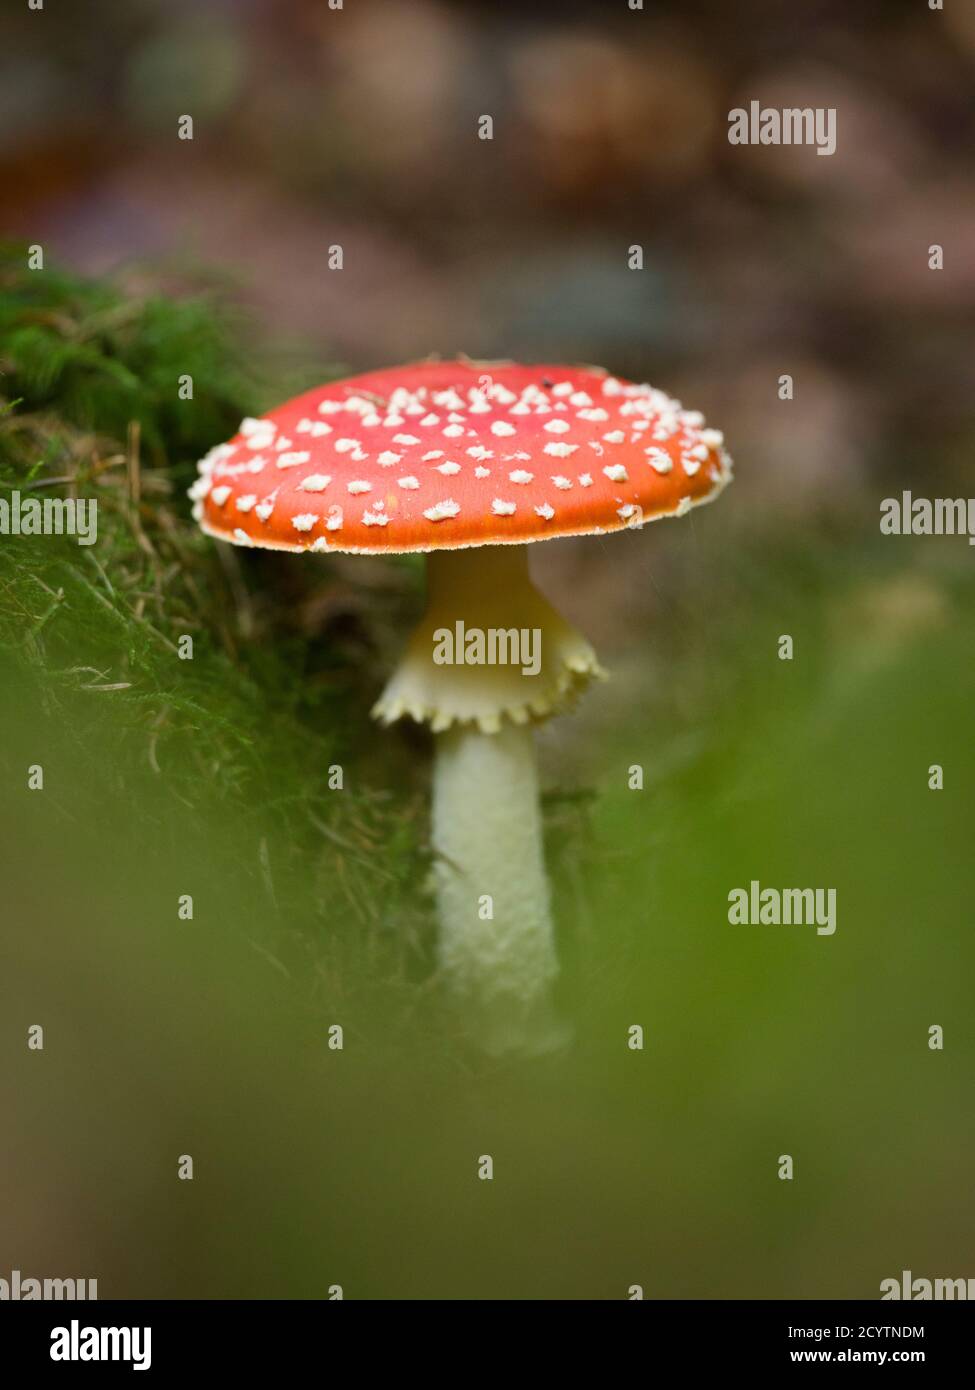 Fly Agaric or Fly Amanita (Amanita muscaria) mushroom growing on a woodland floor in the Mendip Hills, Somerset, England. Stock Photo